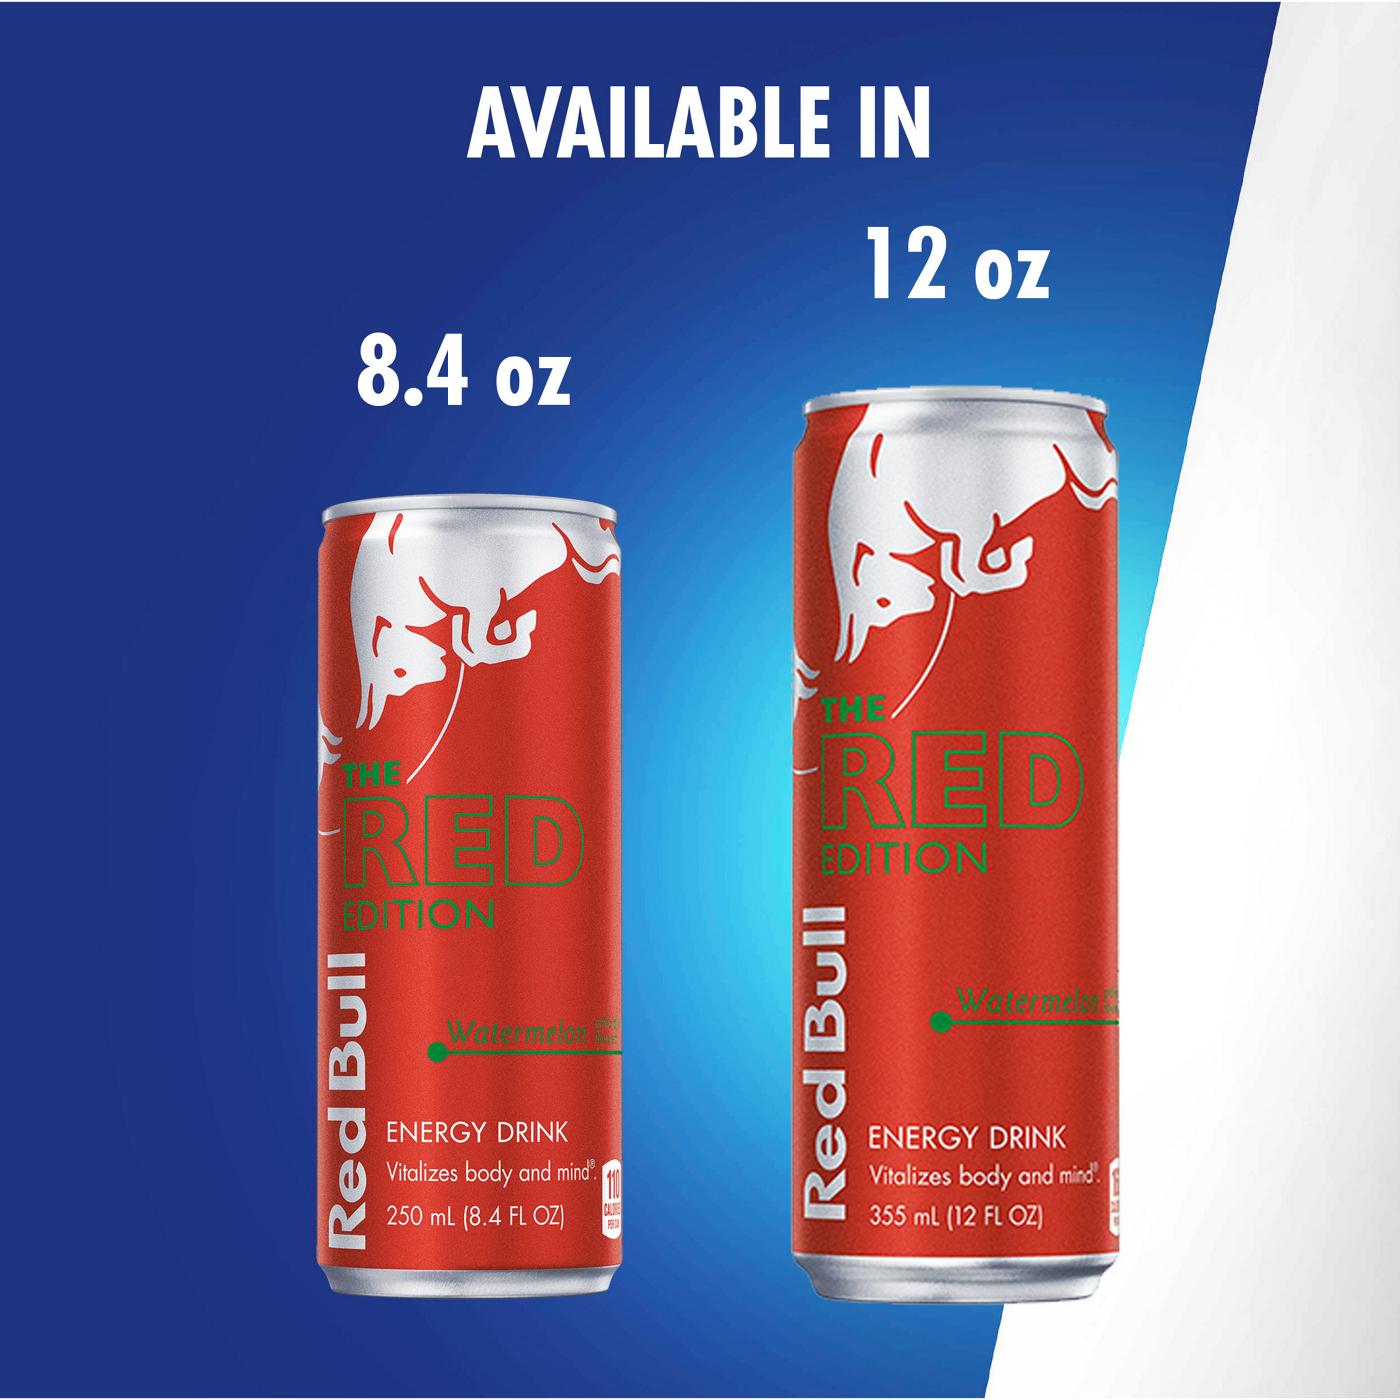 Red Bull The Red Edition Watermelon Energy Drink; image 7 of 7